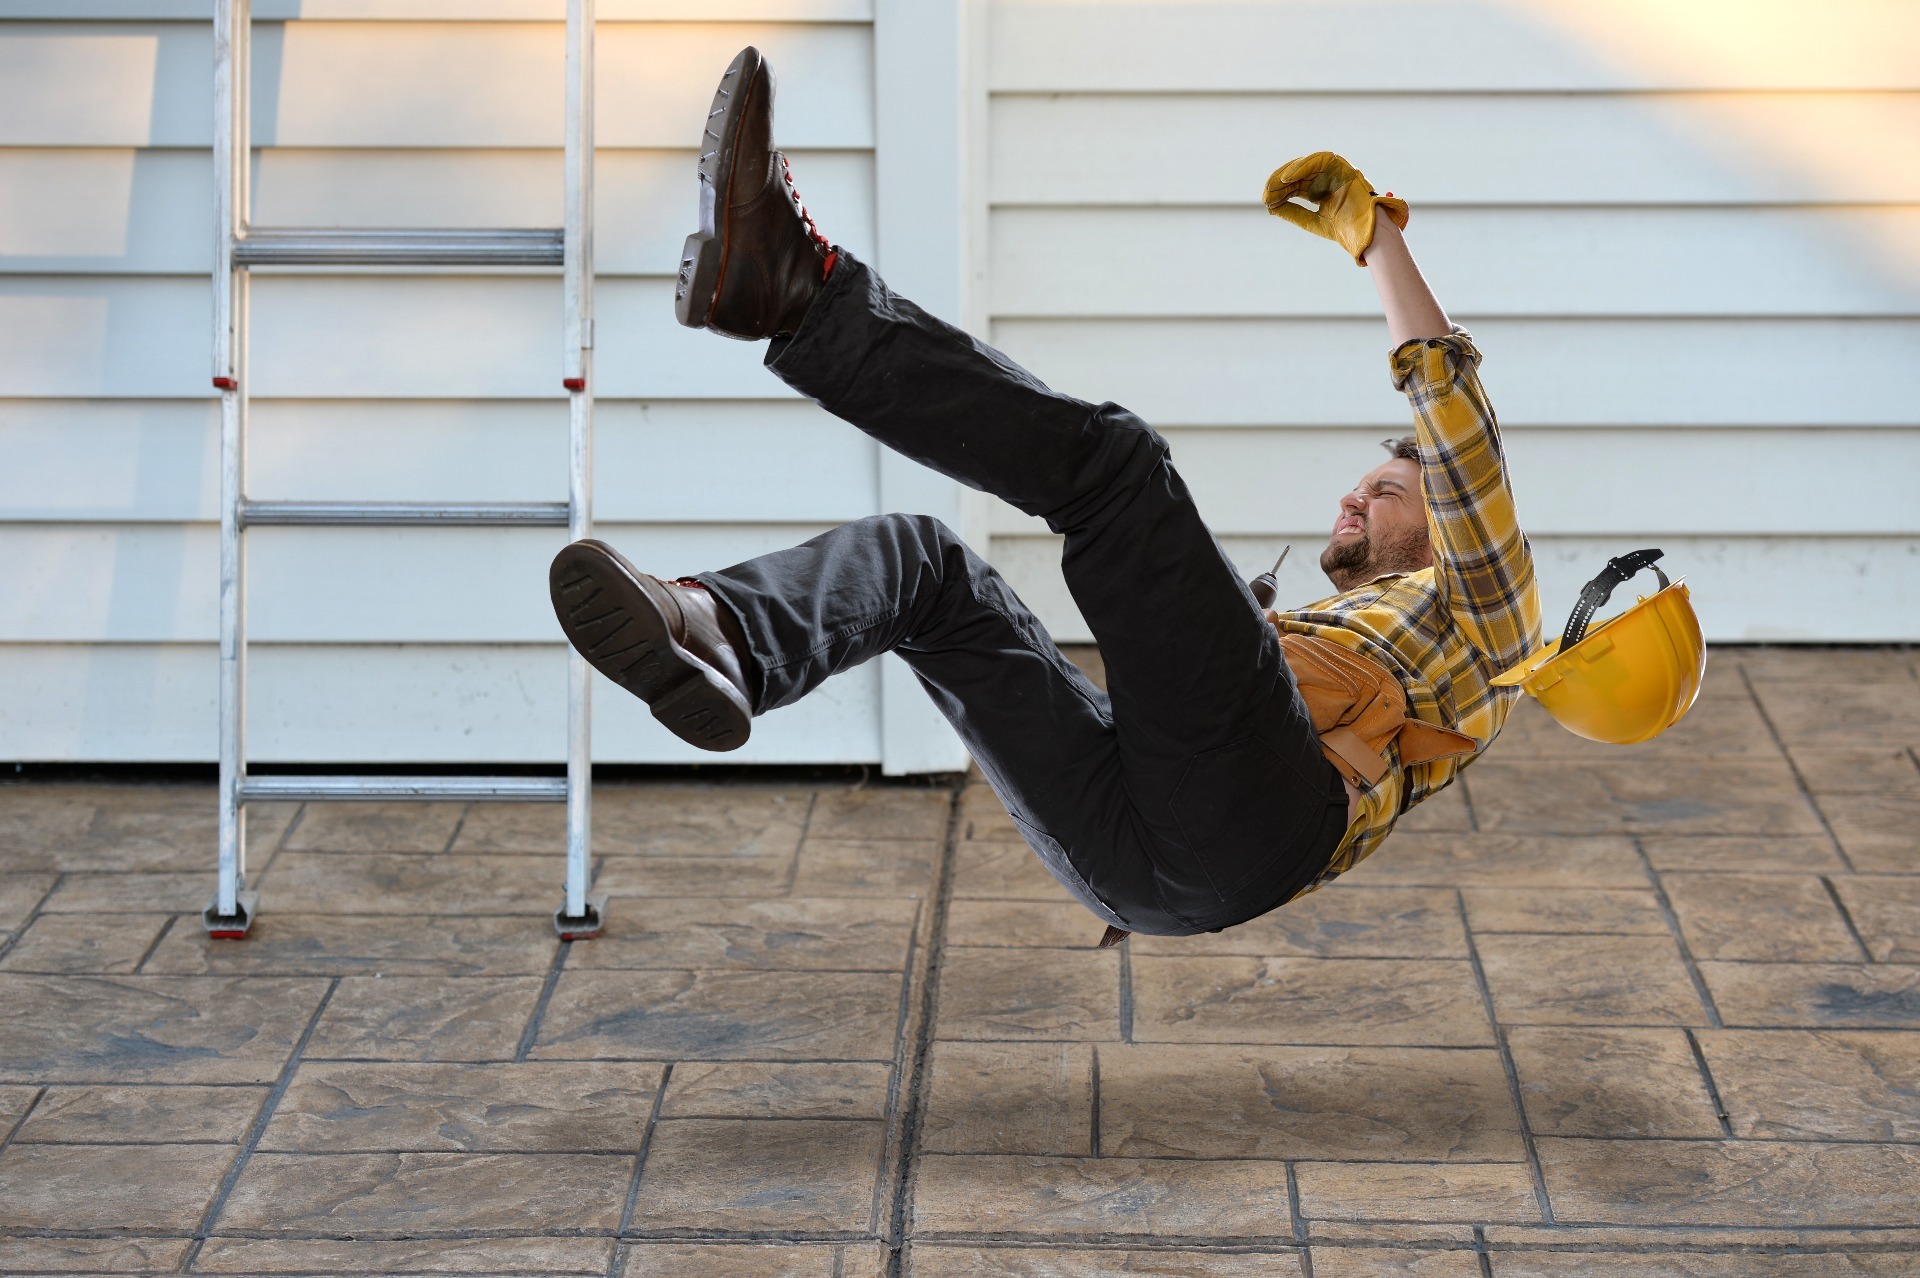 A person wearing jeans, boots and a yellow shirt, falling from a ladder, with their hard-hat falling to the floor; our No Win No Fee Solicitors can assist with making an injury compensation claim if you've been injured at work.